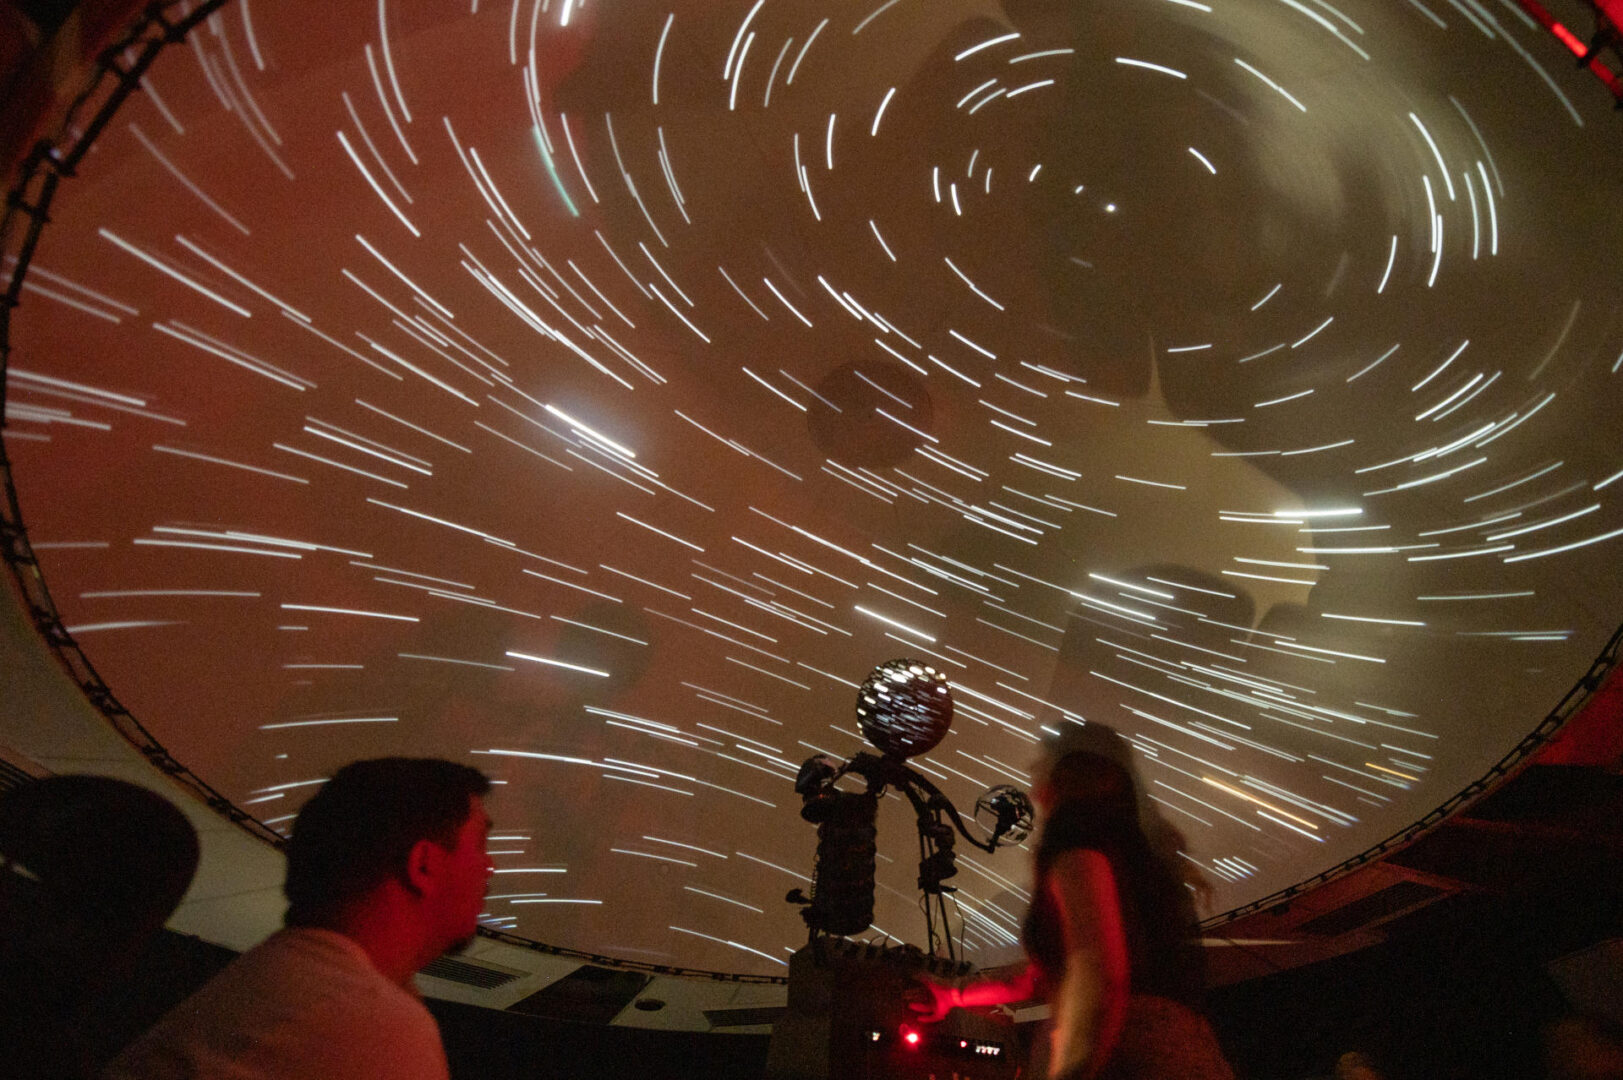 Students explore the universe in the Roth Planetarium at the Chico State campus.